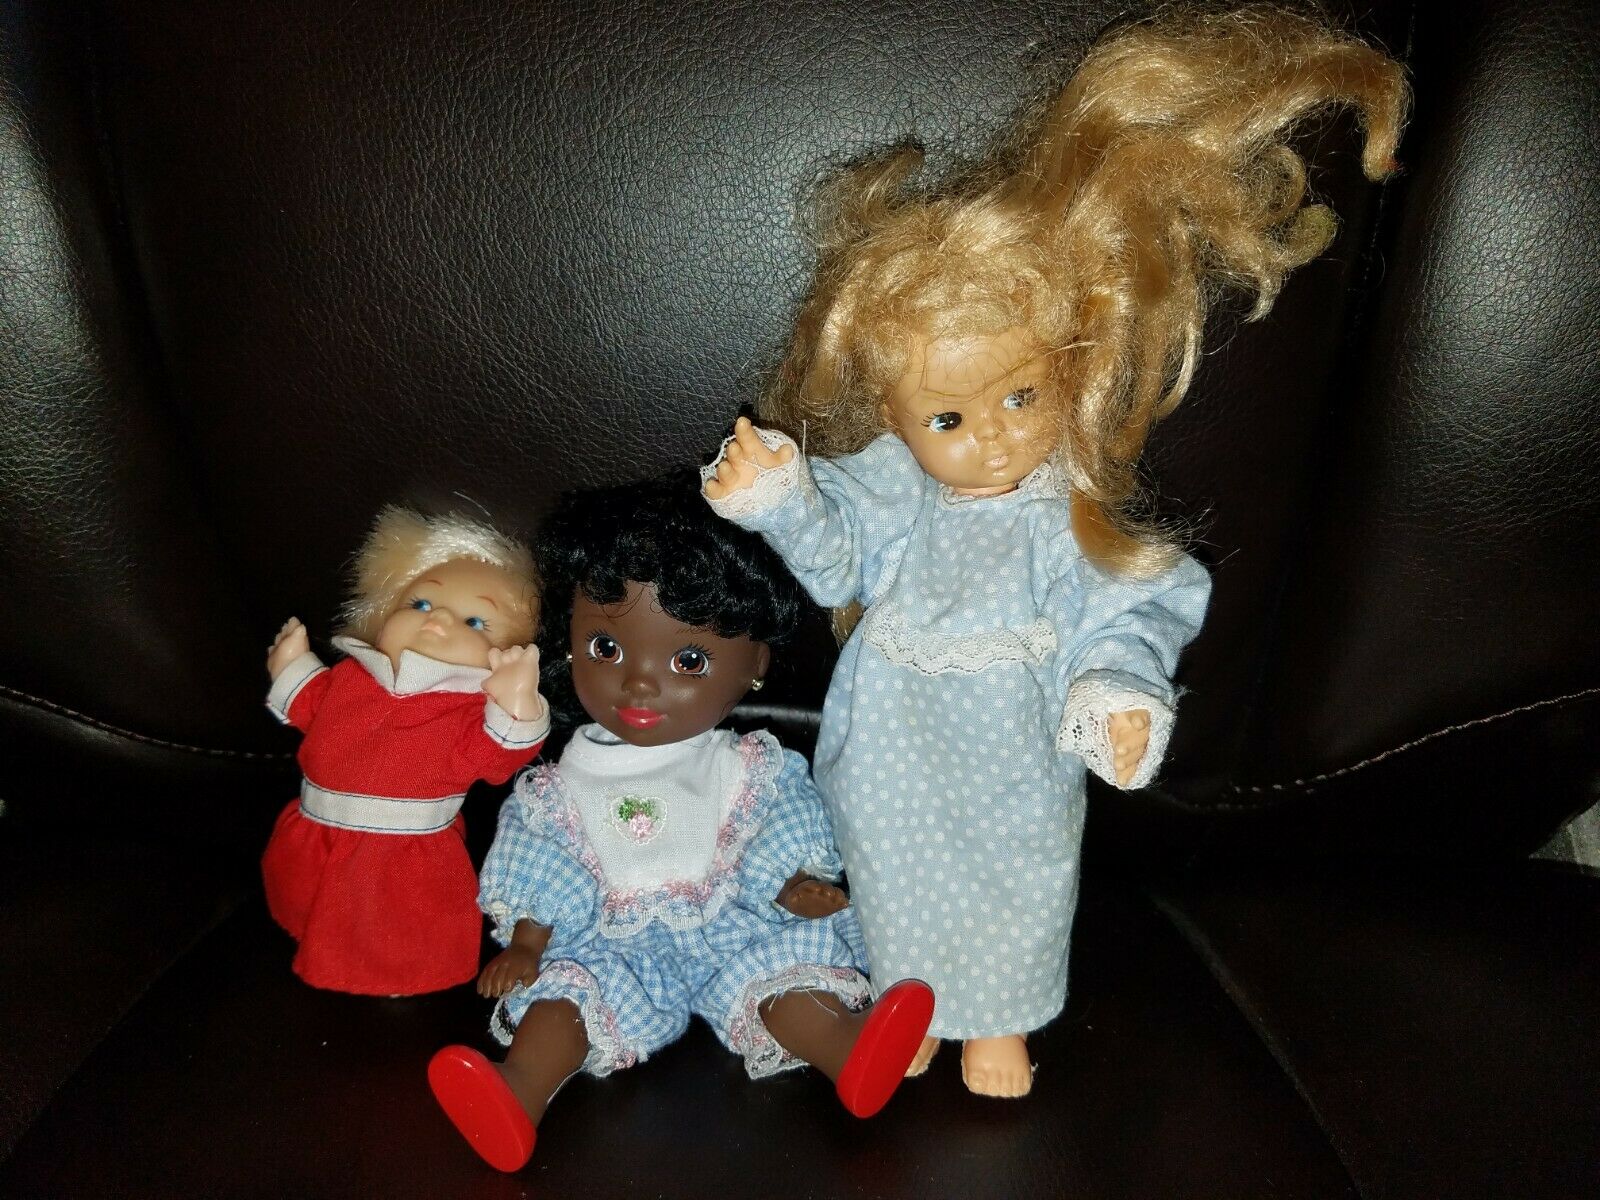 3 Doll Lot - Small Dolls - Dolls Have Several Hair Issues